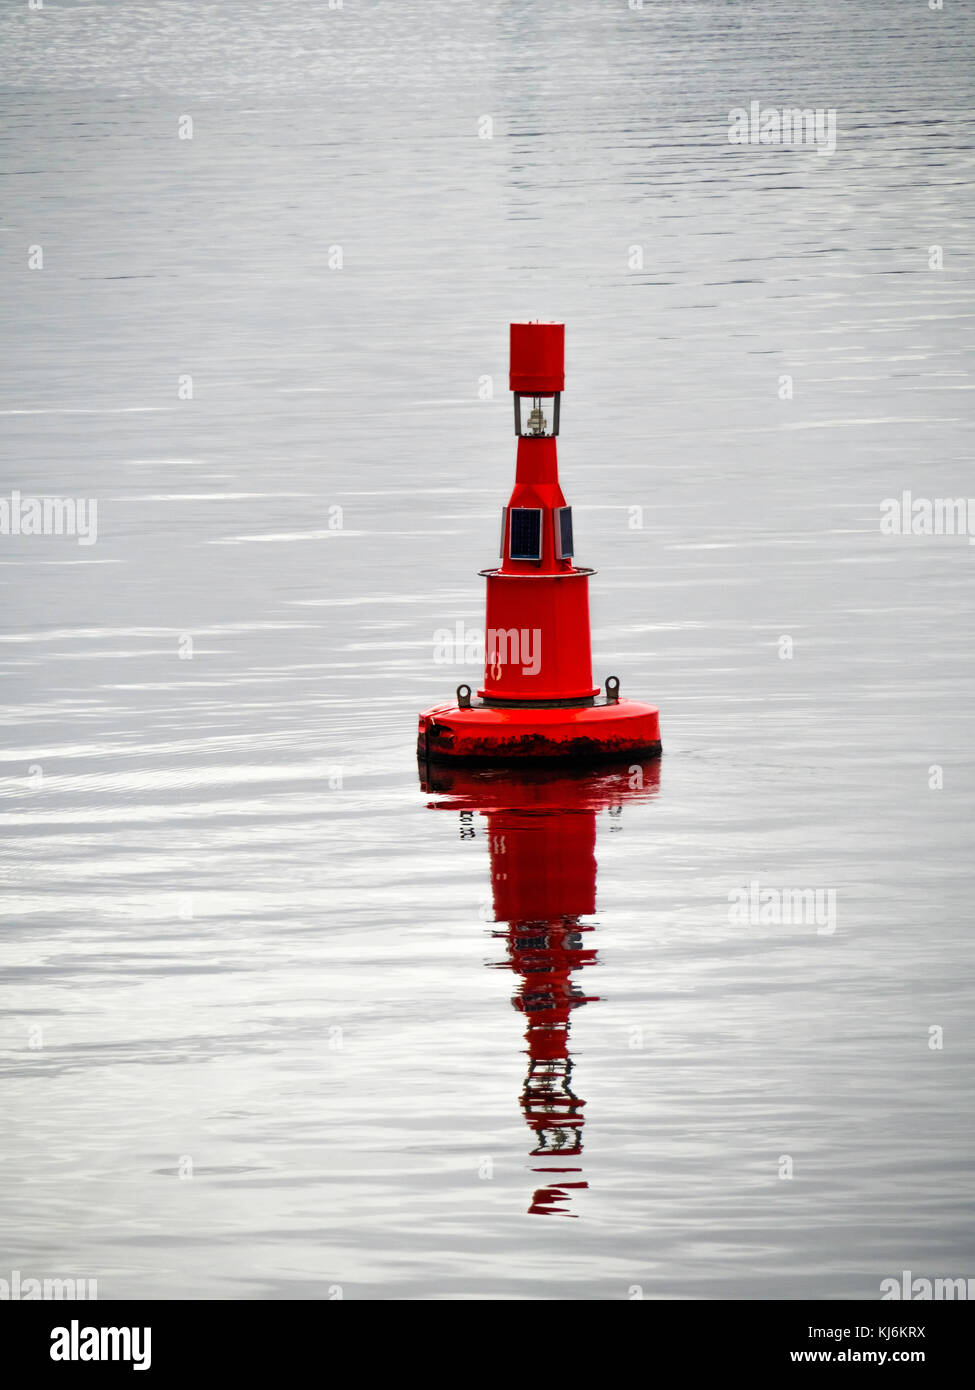 A red channel marker buoy in the Port of Tees with solar powered